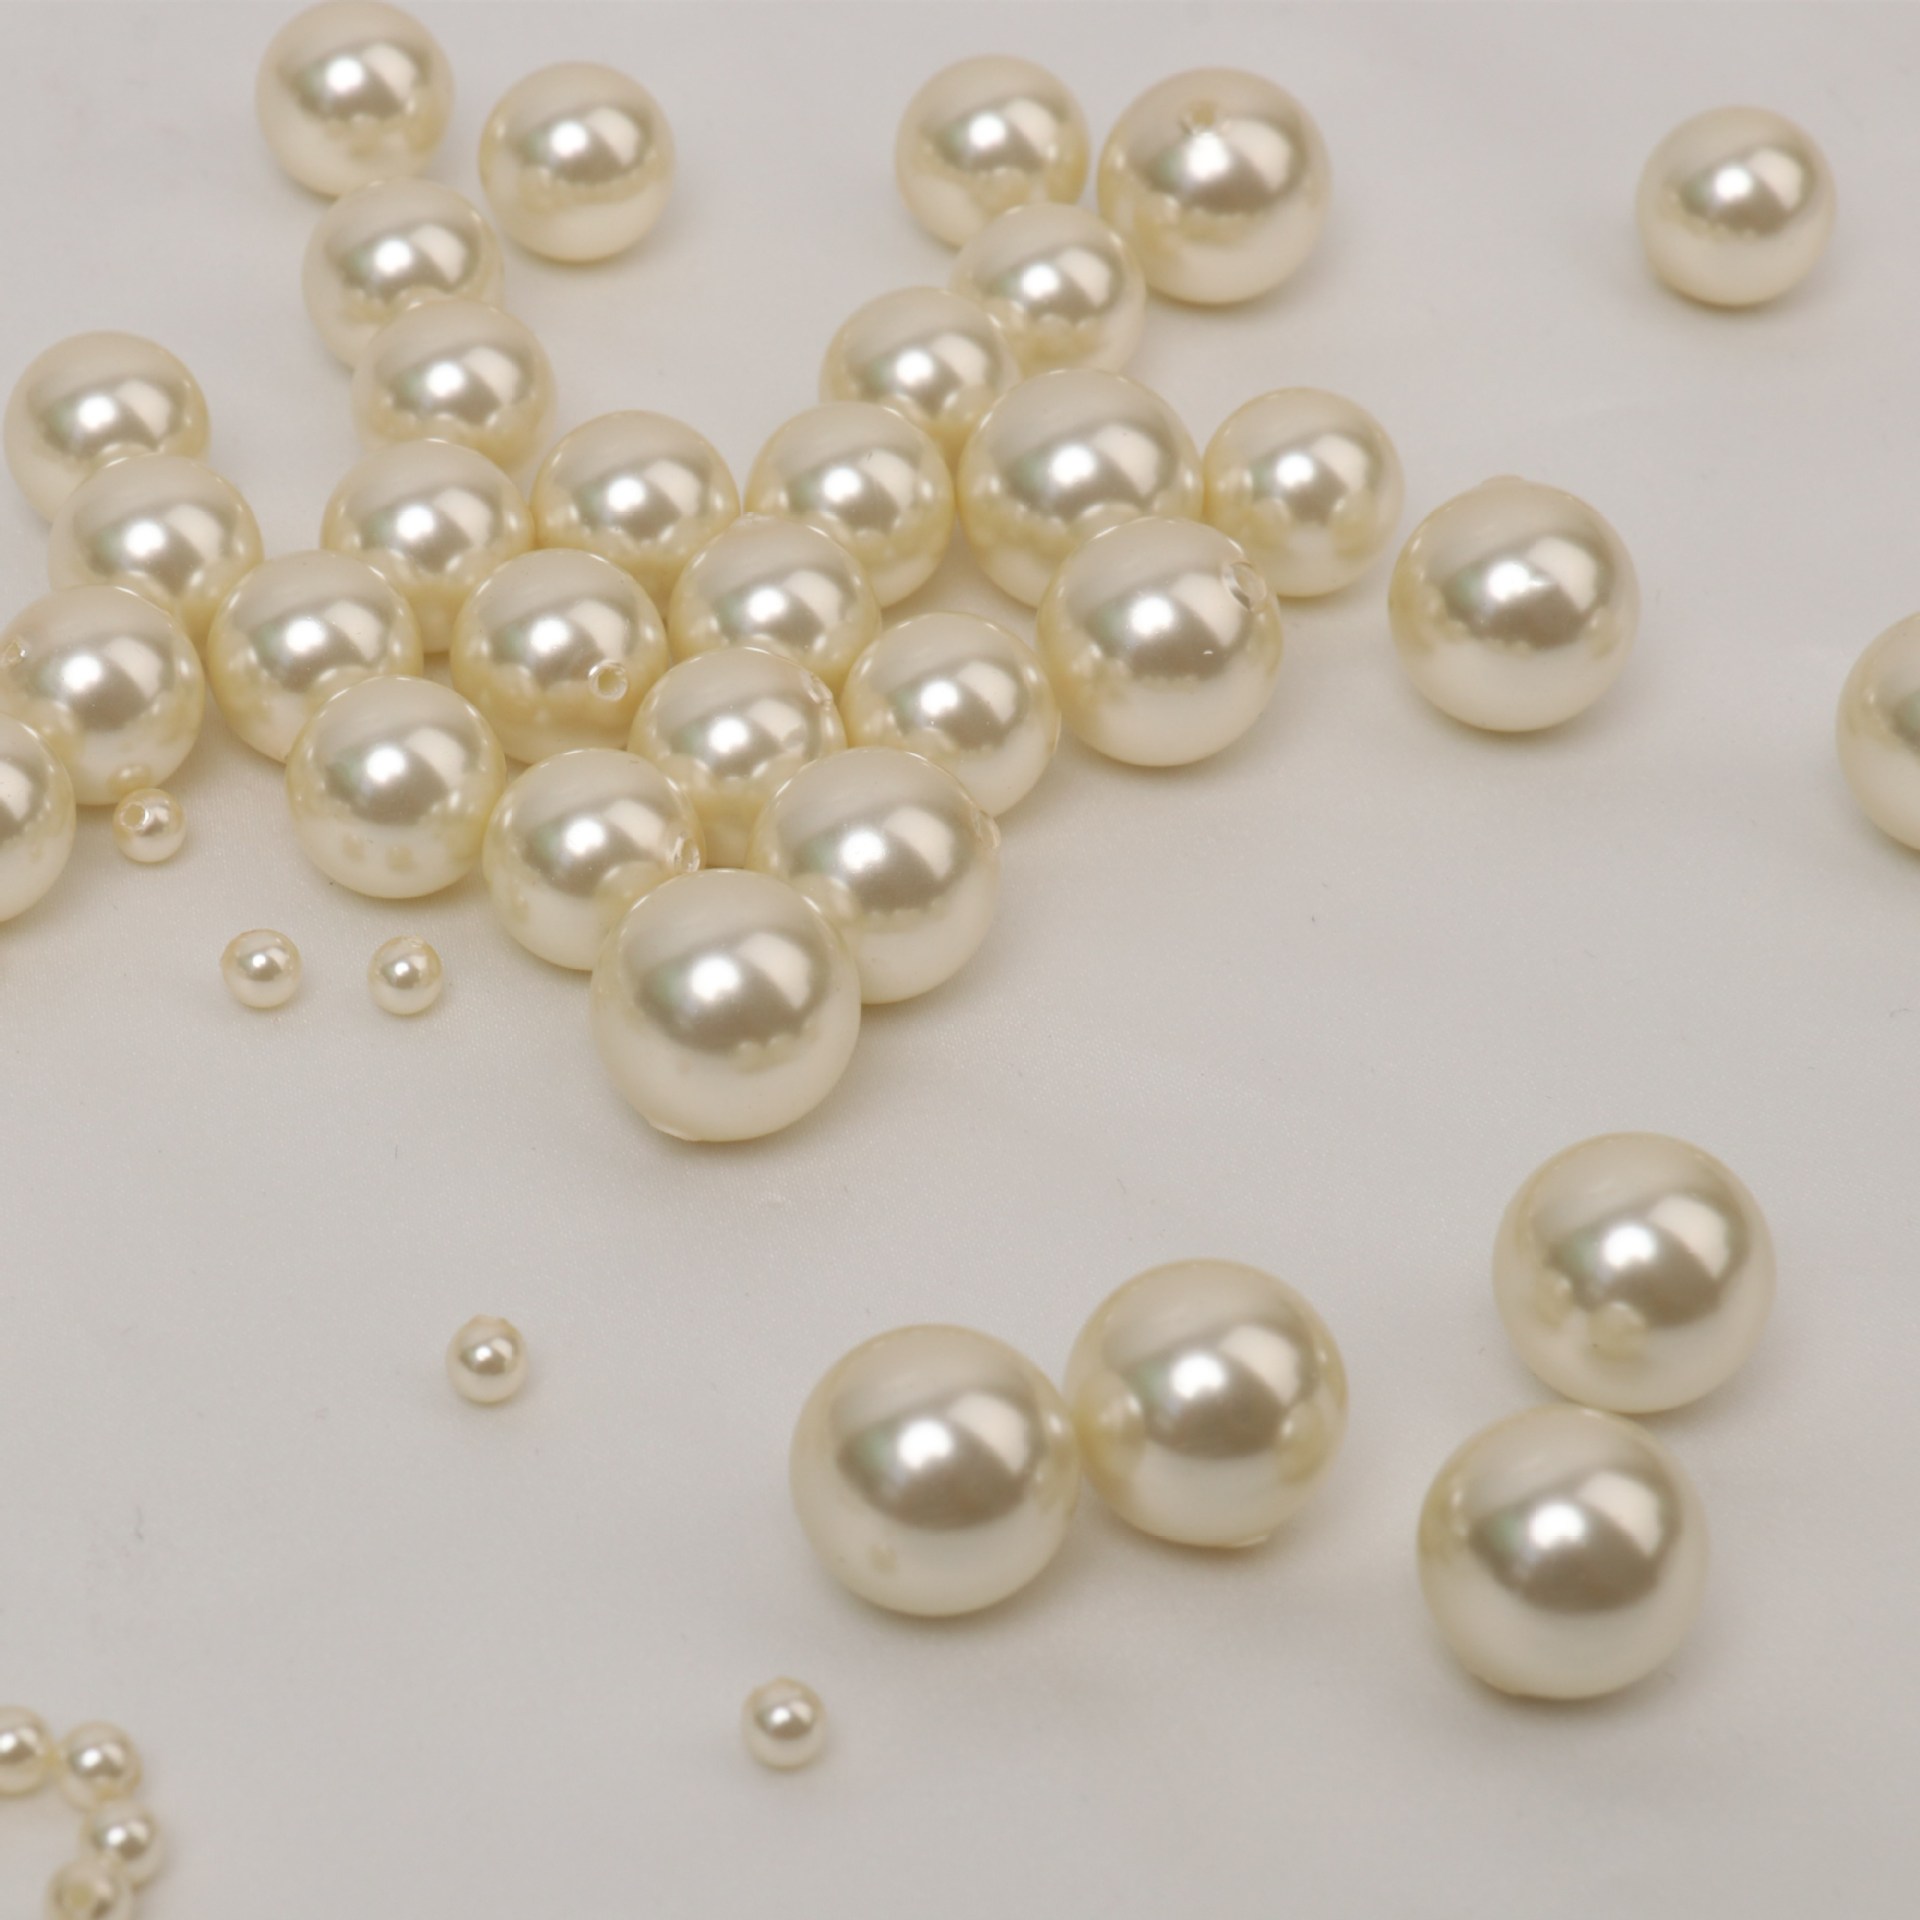 Pearl off-white 8mm